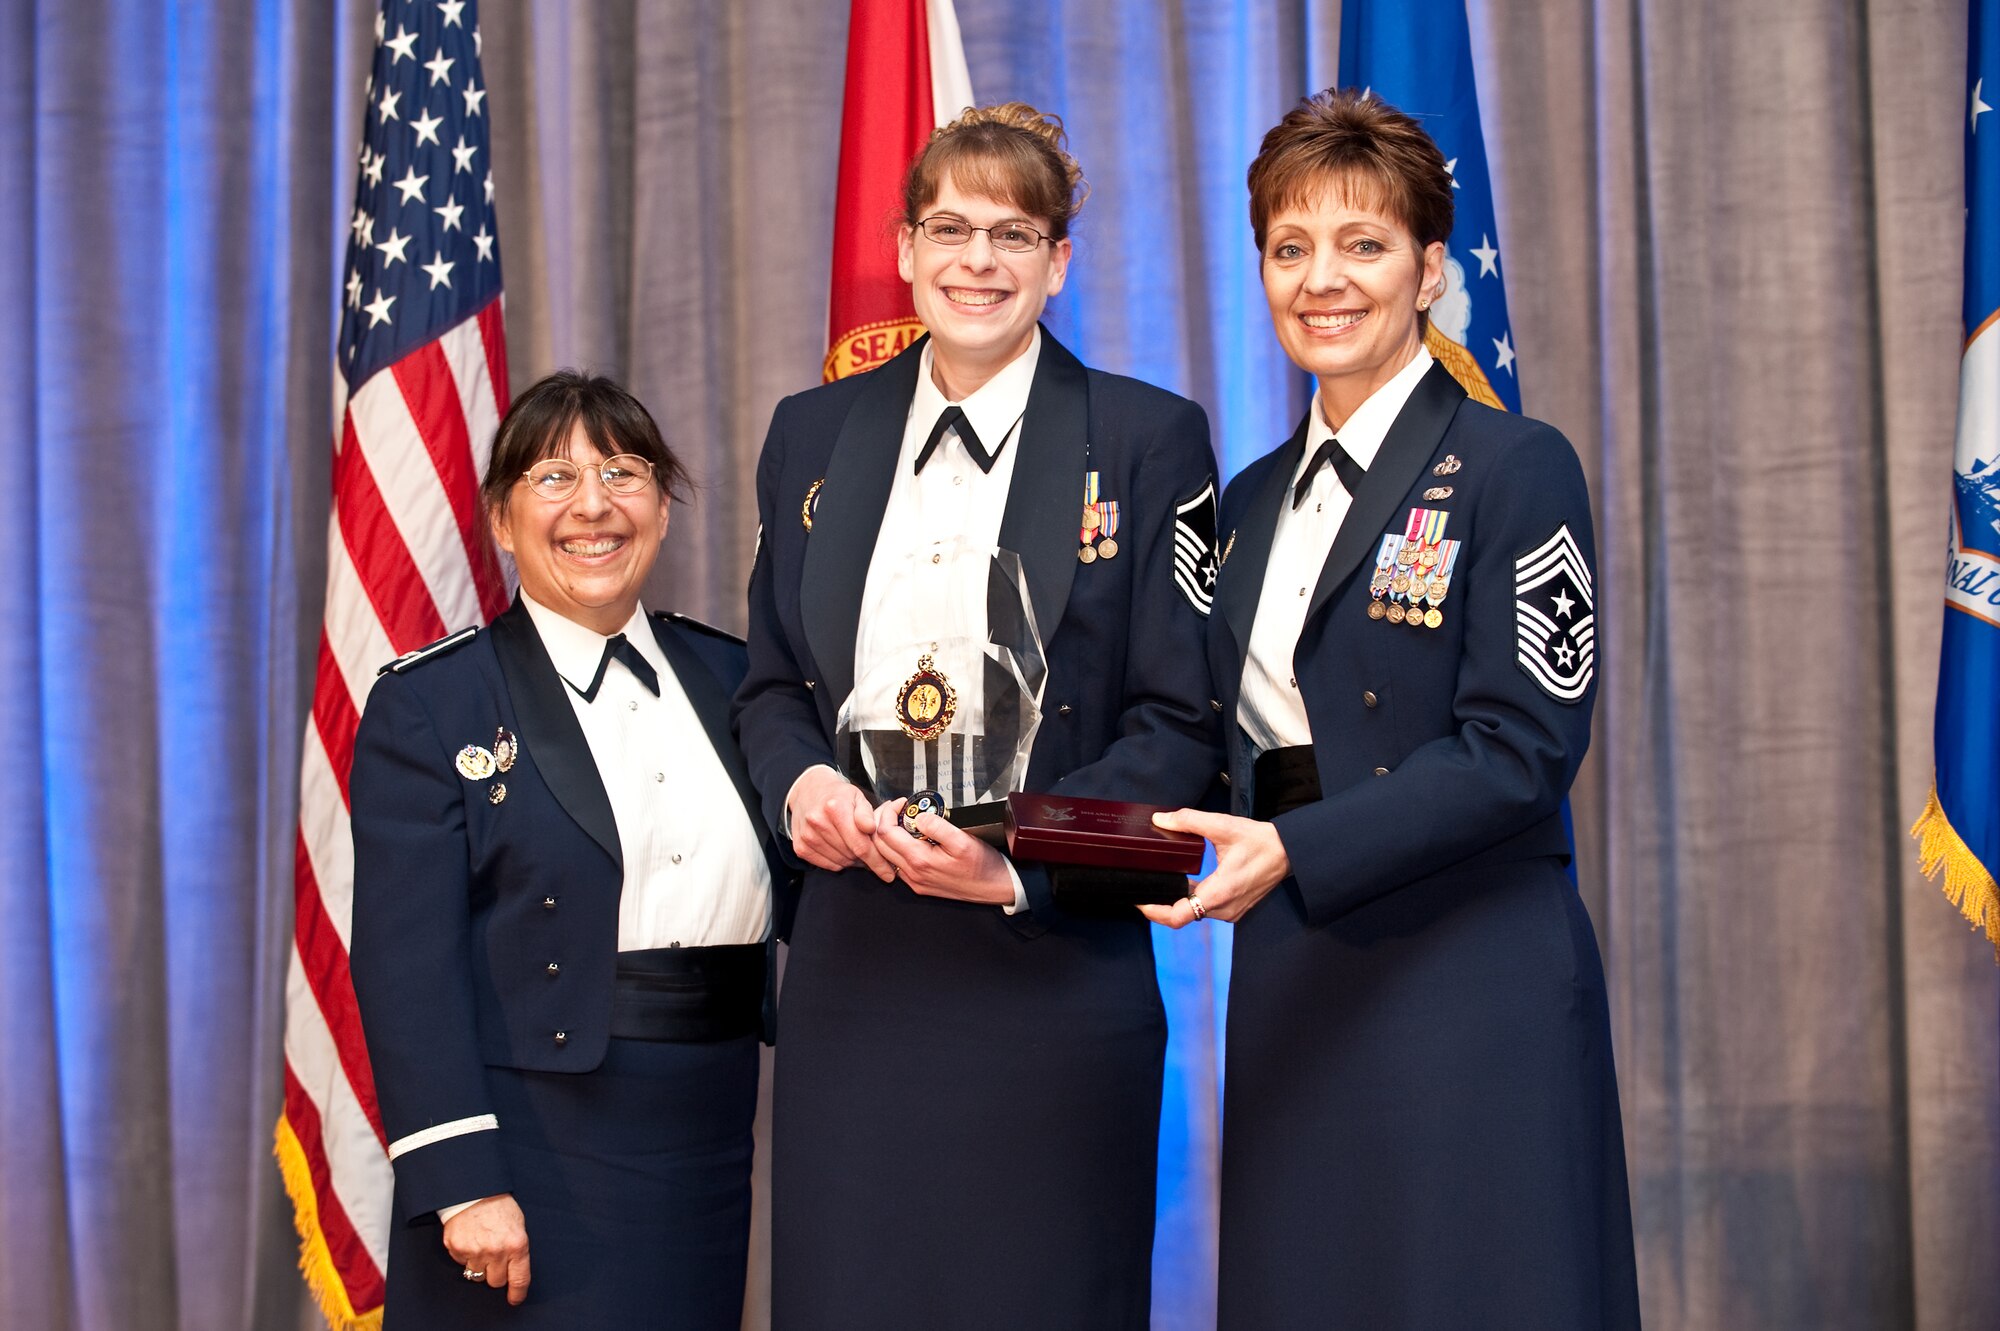 Master Sgt. Amanda Conaway,178th Fighter Wing Retention Office Mangager, receives  Rookie Retention Office Manager of the Yearaward from Col. Mary Alice Salcido, Director, ANG Recruiting and Retention, and Chief Master Sgt. Denise Jelinski-Hall, Senior Enlisted Leader for the National Guard. Bureau March 29.  Master Sgt. Conaway was selected from candidates from all the 54 states and territories.